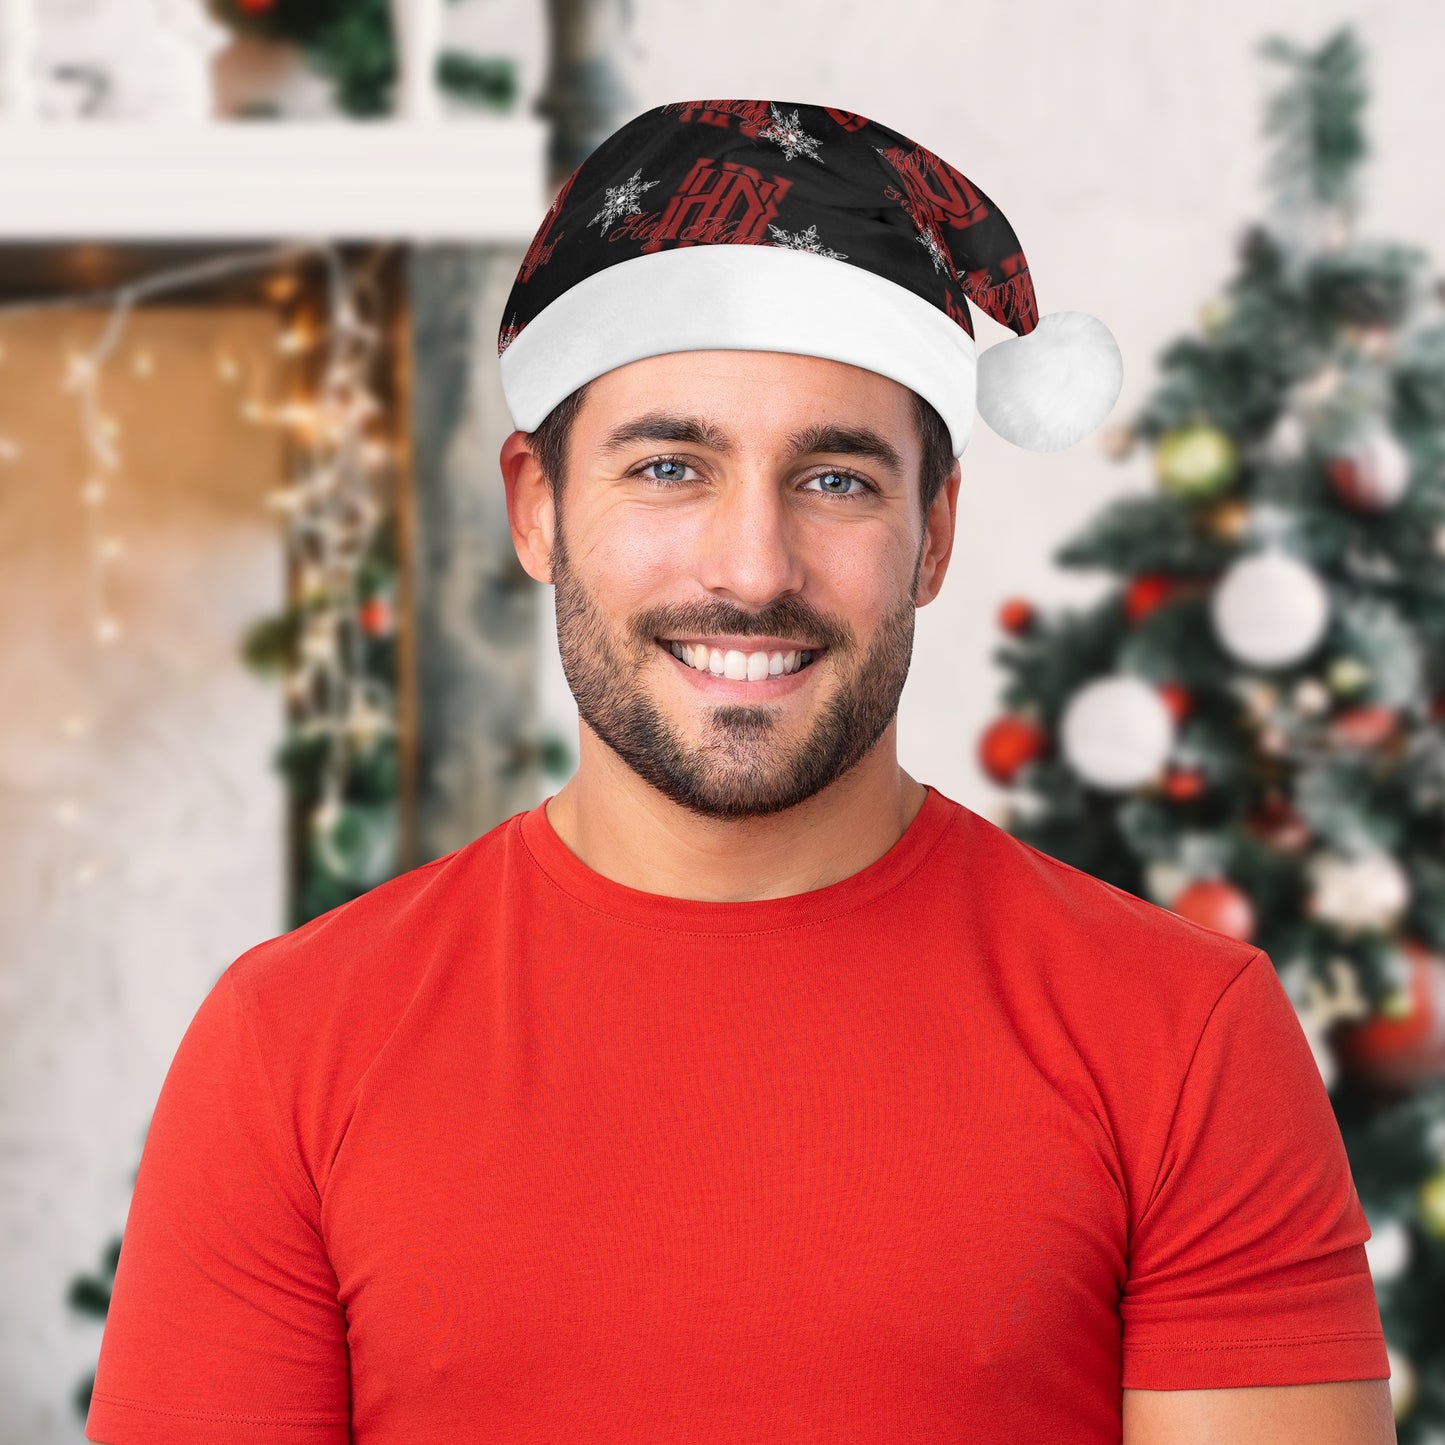 Stand out  with the  HN Christmas Santa‘s Hats  available at Hey Nugget. Grab yours today!